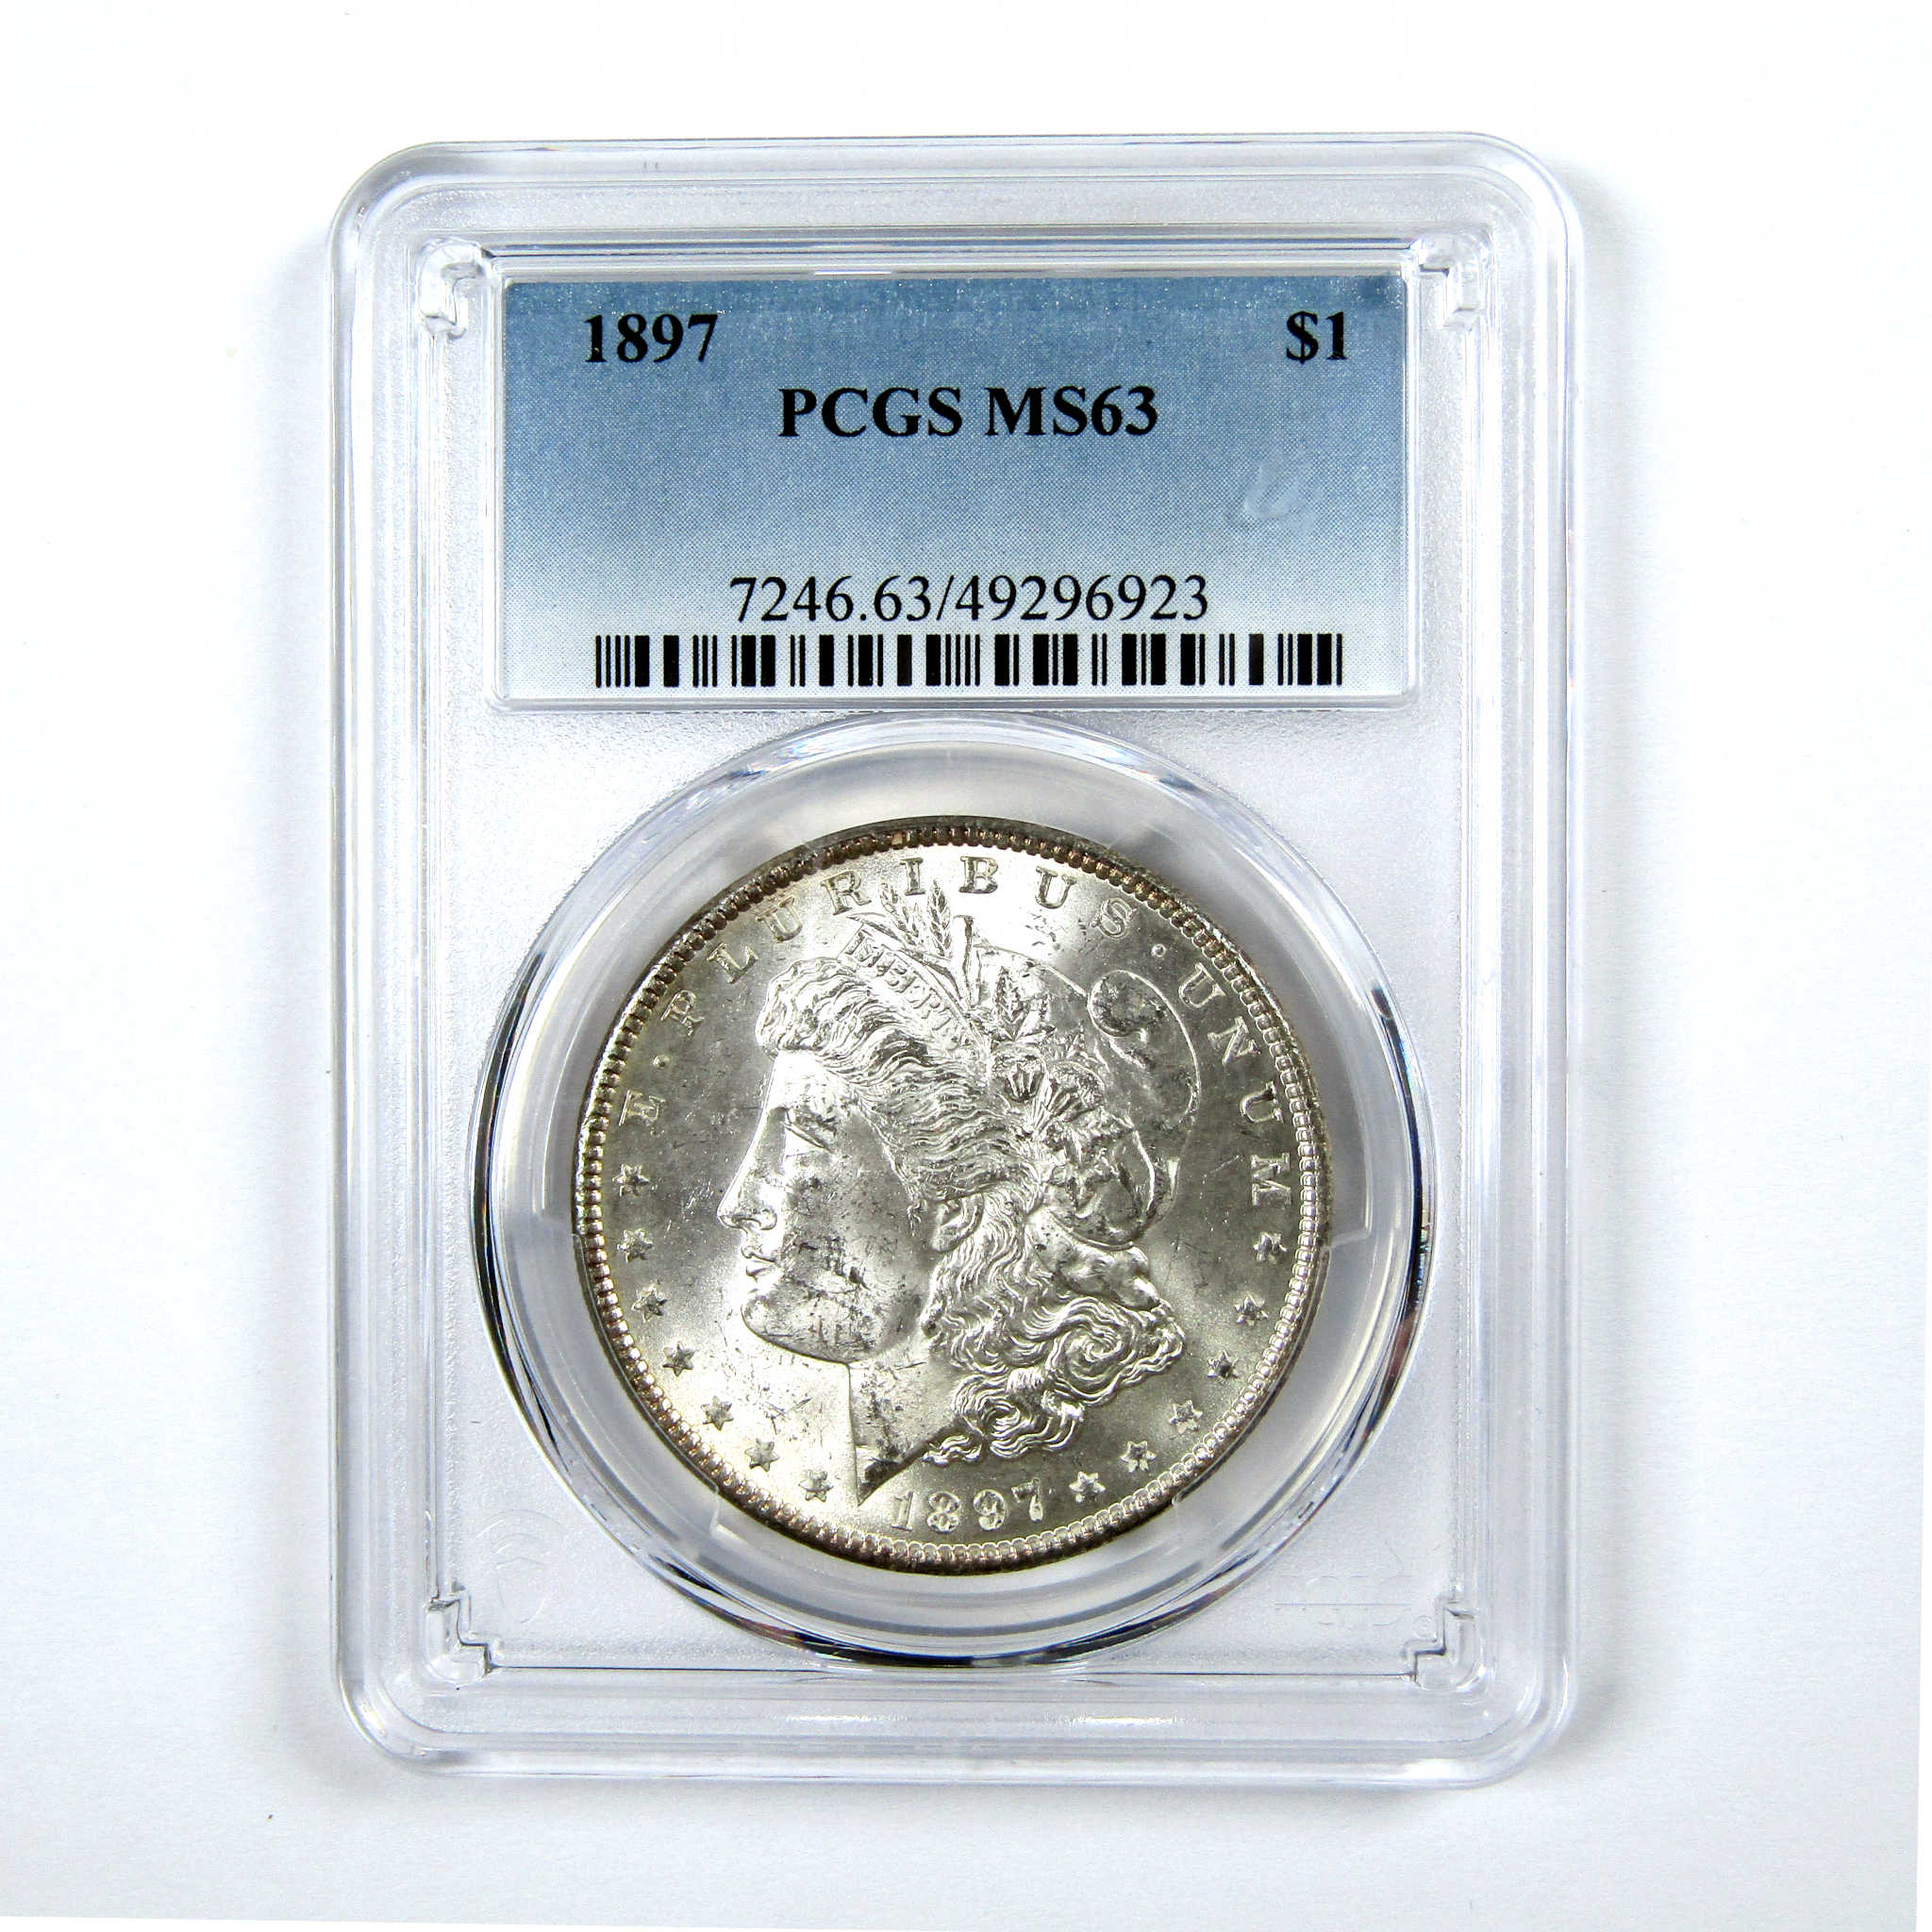 1897 Morgan Dollar MS 63 PCGS Silver $1 Uncirculated Coin SKU:I13922 - Morgan coin - Morgan silver dollar - Morgan silver dollar for sale - Profile Coins &amp; Collectibles